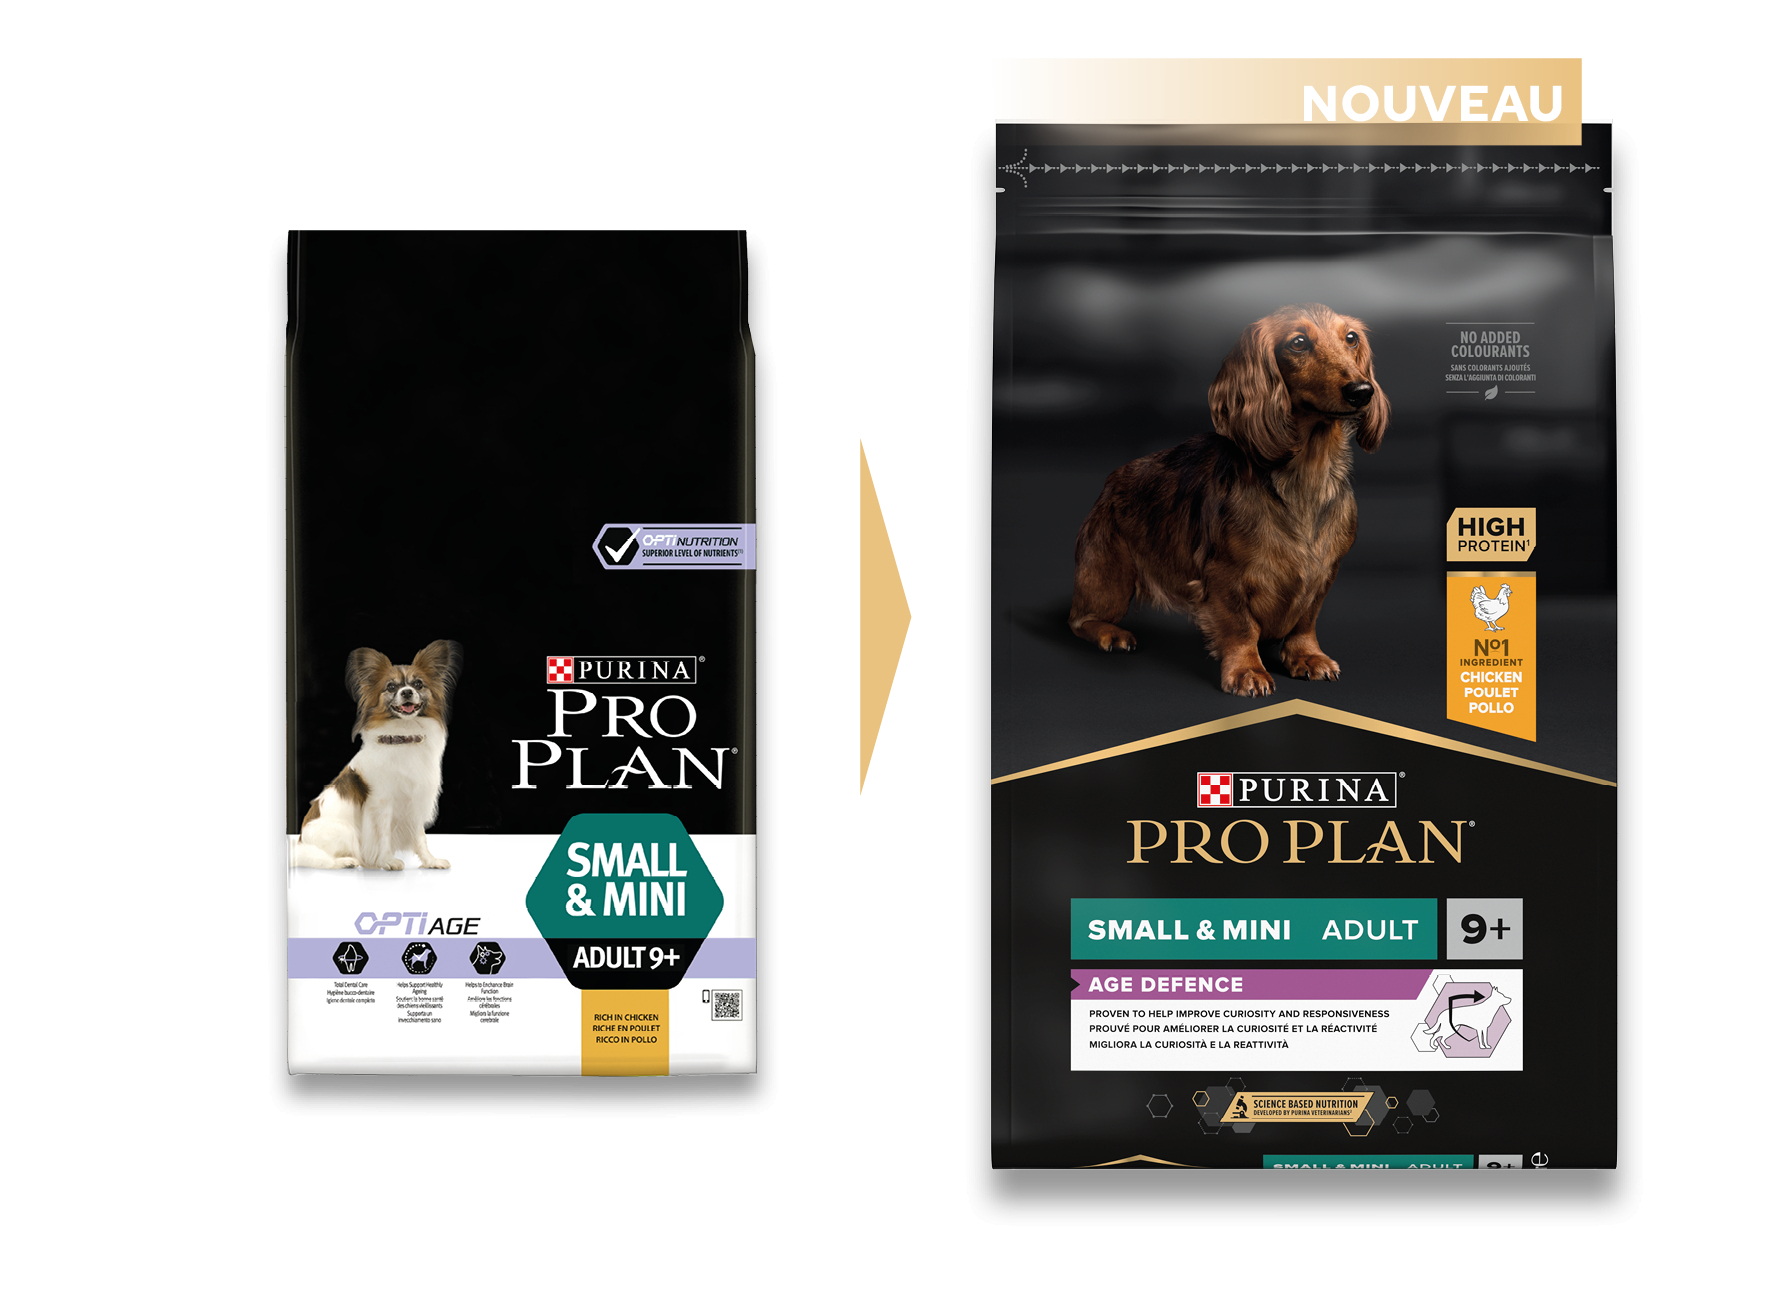 PRO PLAN Small & Mini Adult 9+ Age Defence pienso para perros